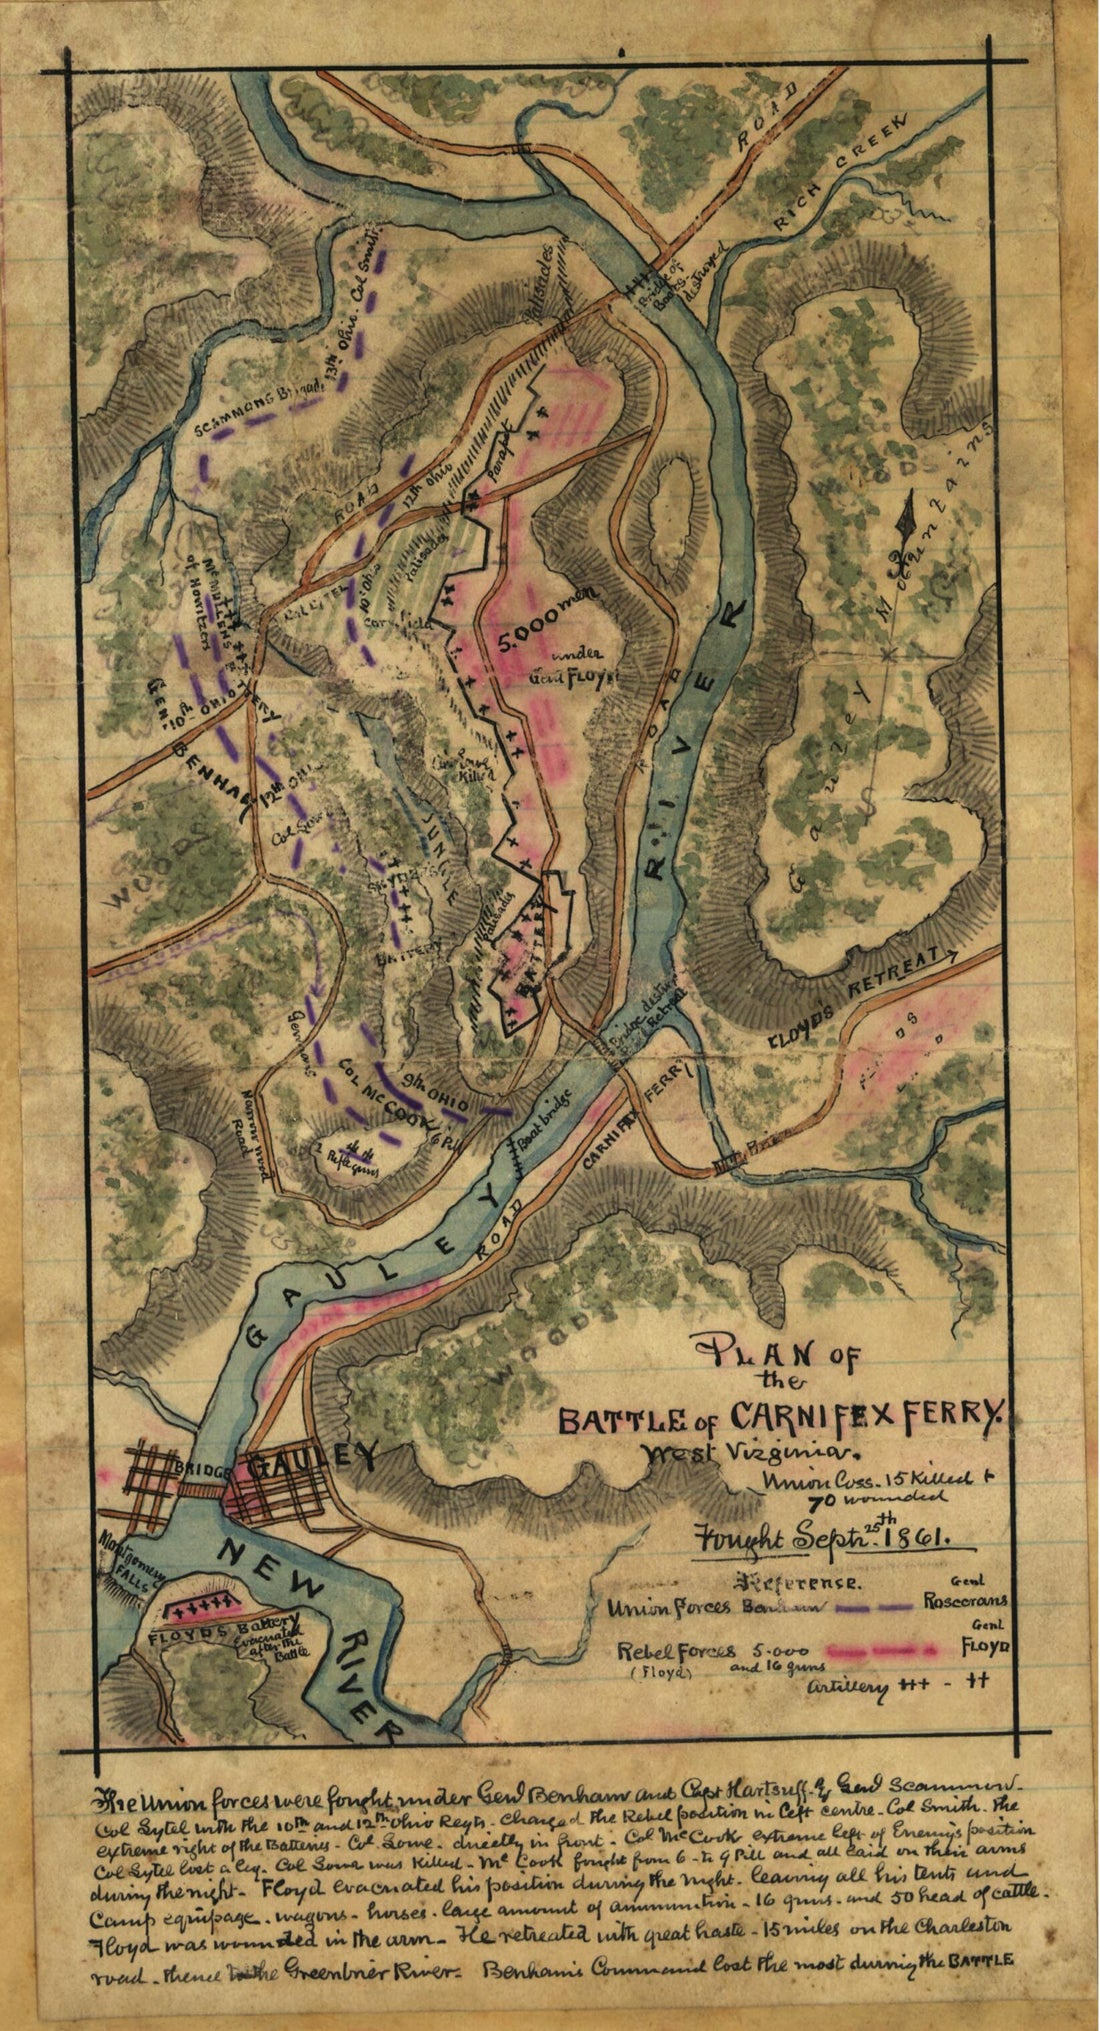 This old map of Plan of the Battle of Carnifex Ferry, West Virginia from 09-25 was created by Robert Knox Sneden in 09-25